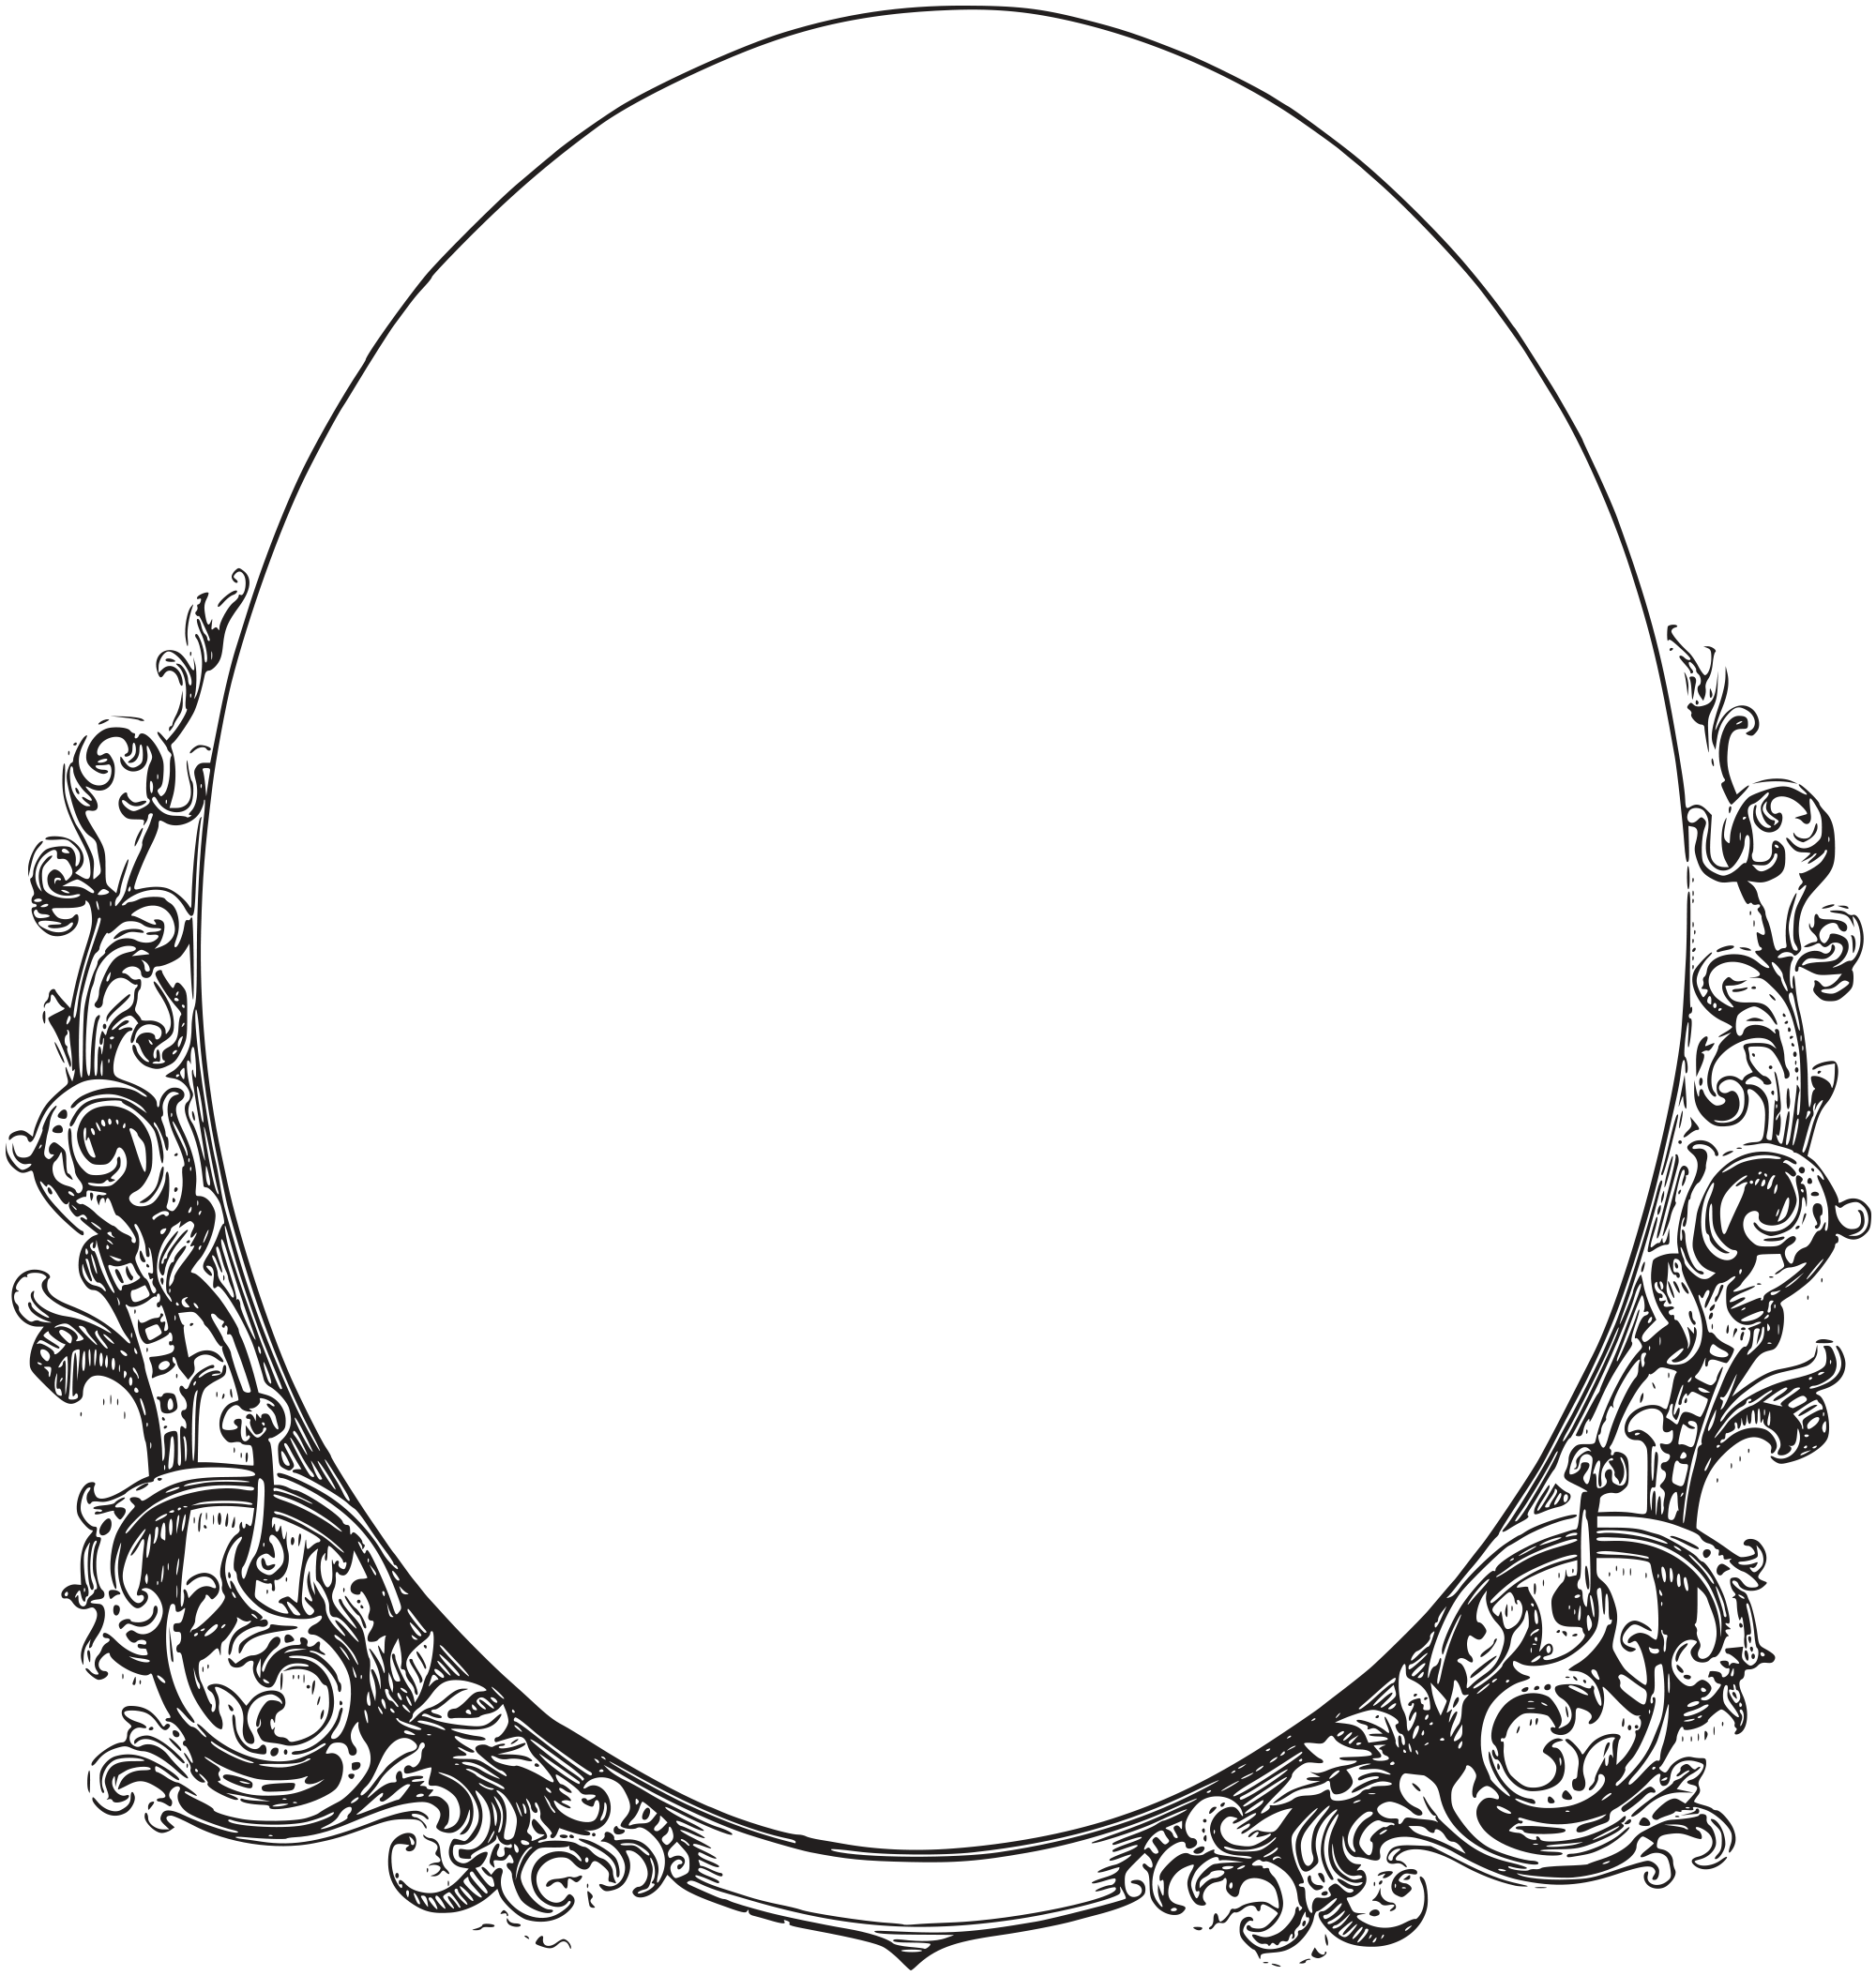 Royalty Free Images - Ornate Oval Frame Border | Oh So Nifty ...